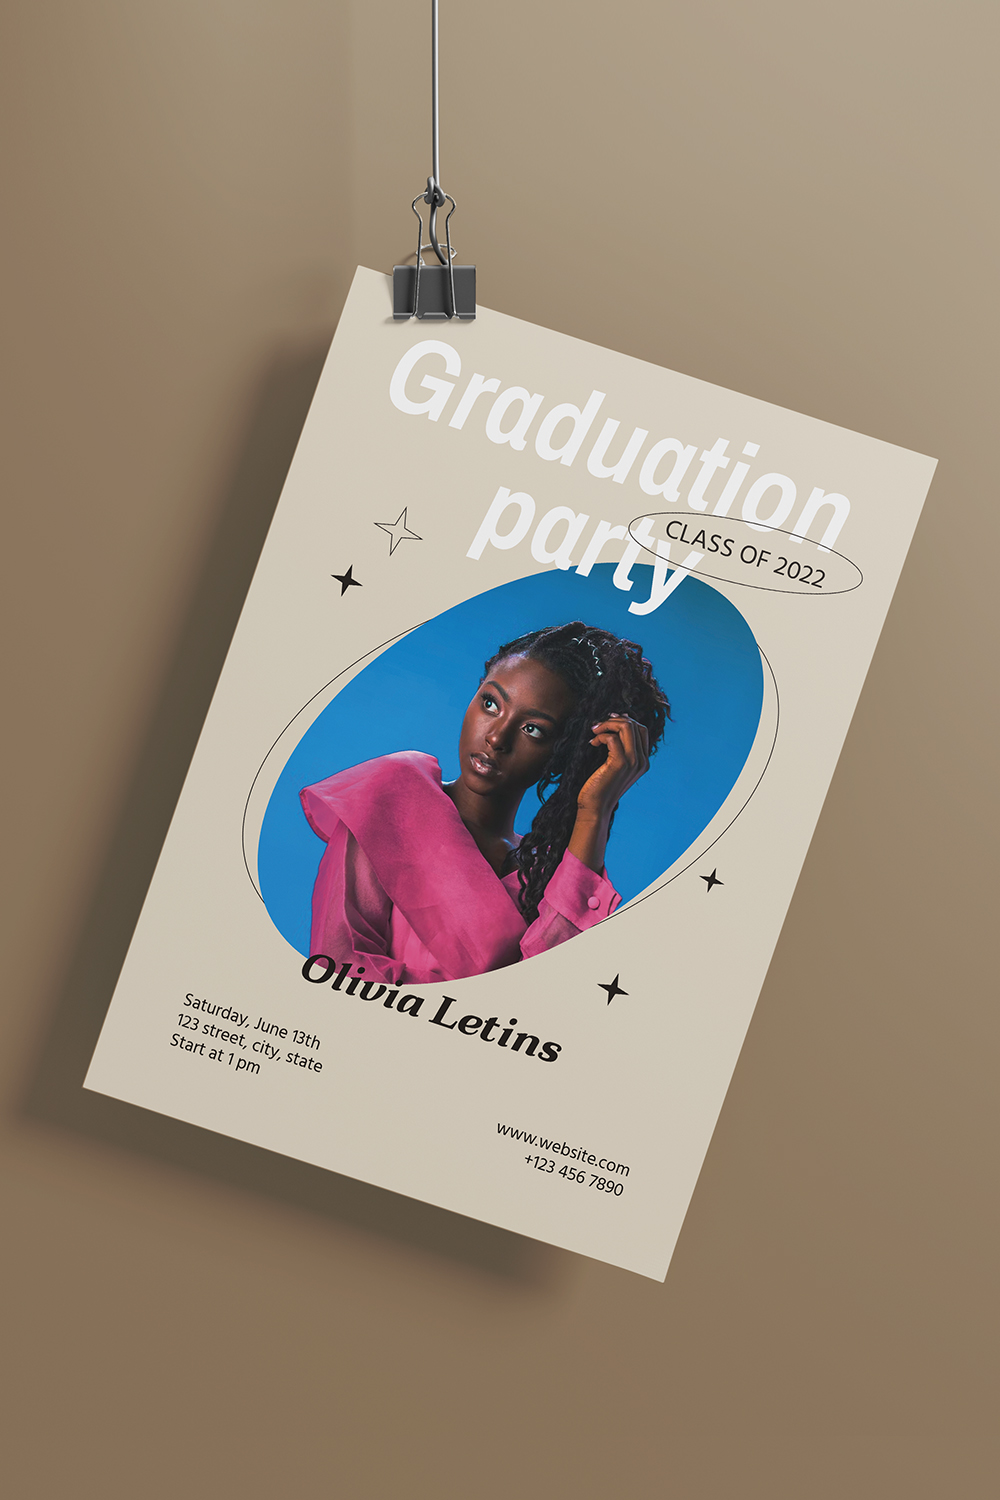 So stylish graduation invitation in a pastel with a bright woman.